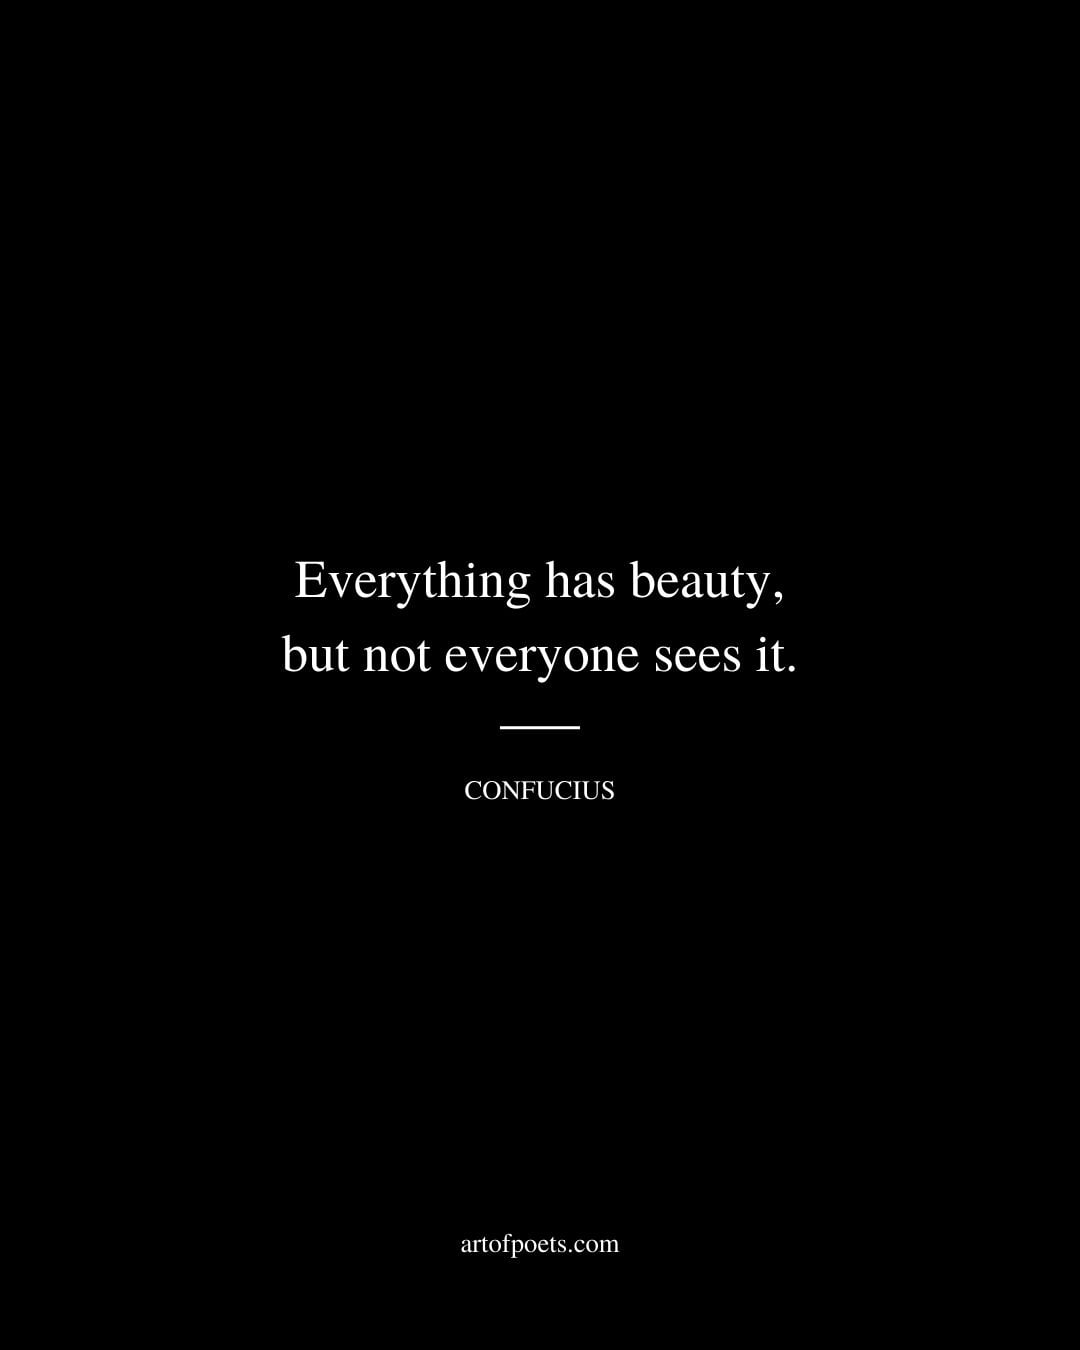 Everything has beauty but not everyone sees it